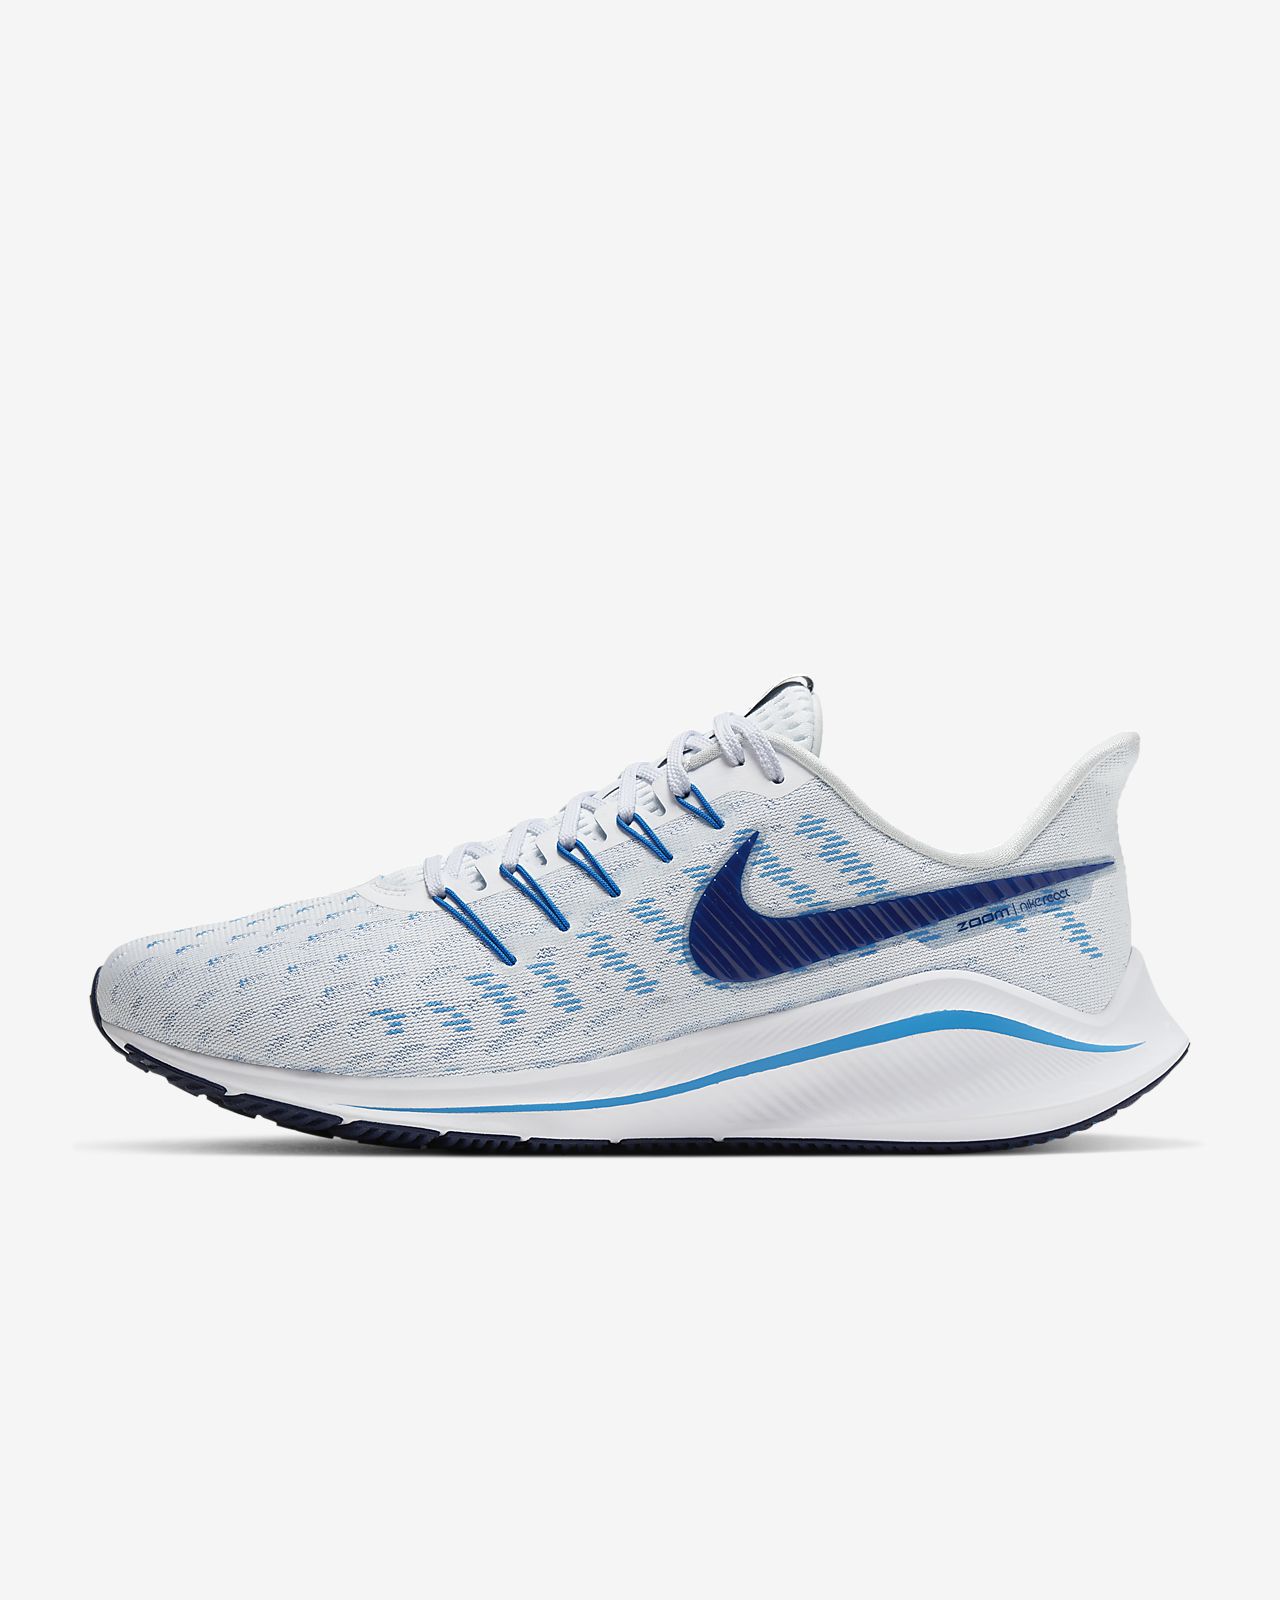 nike zoom structure 14